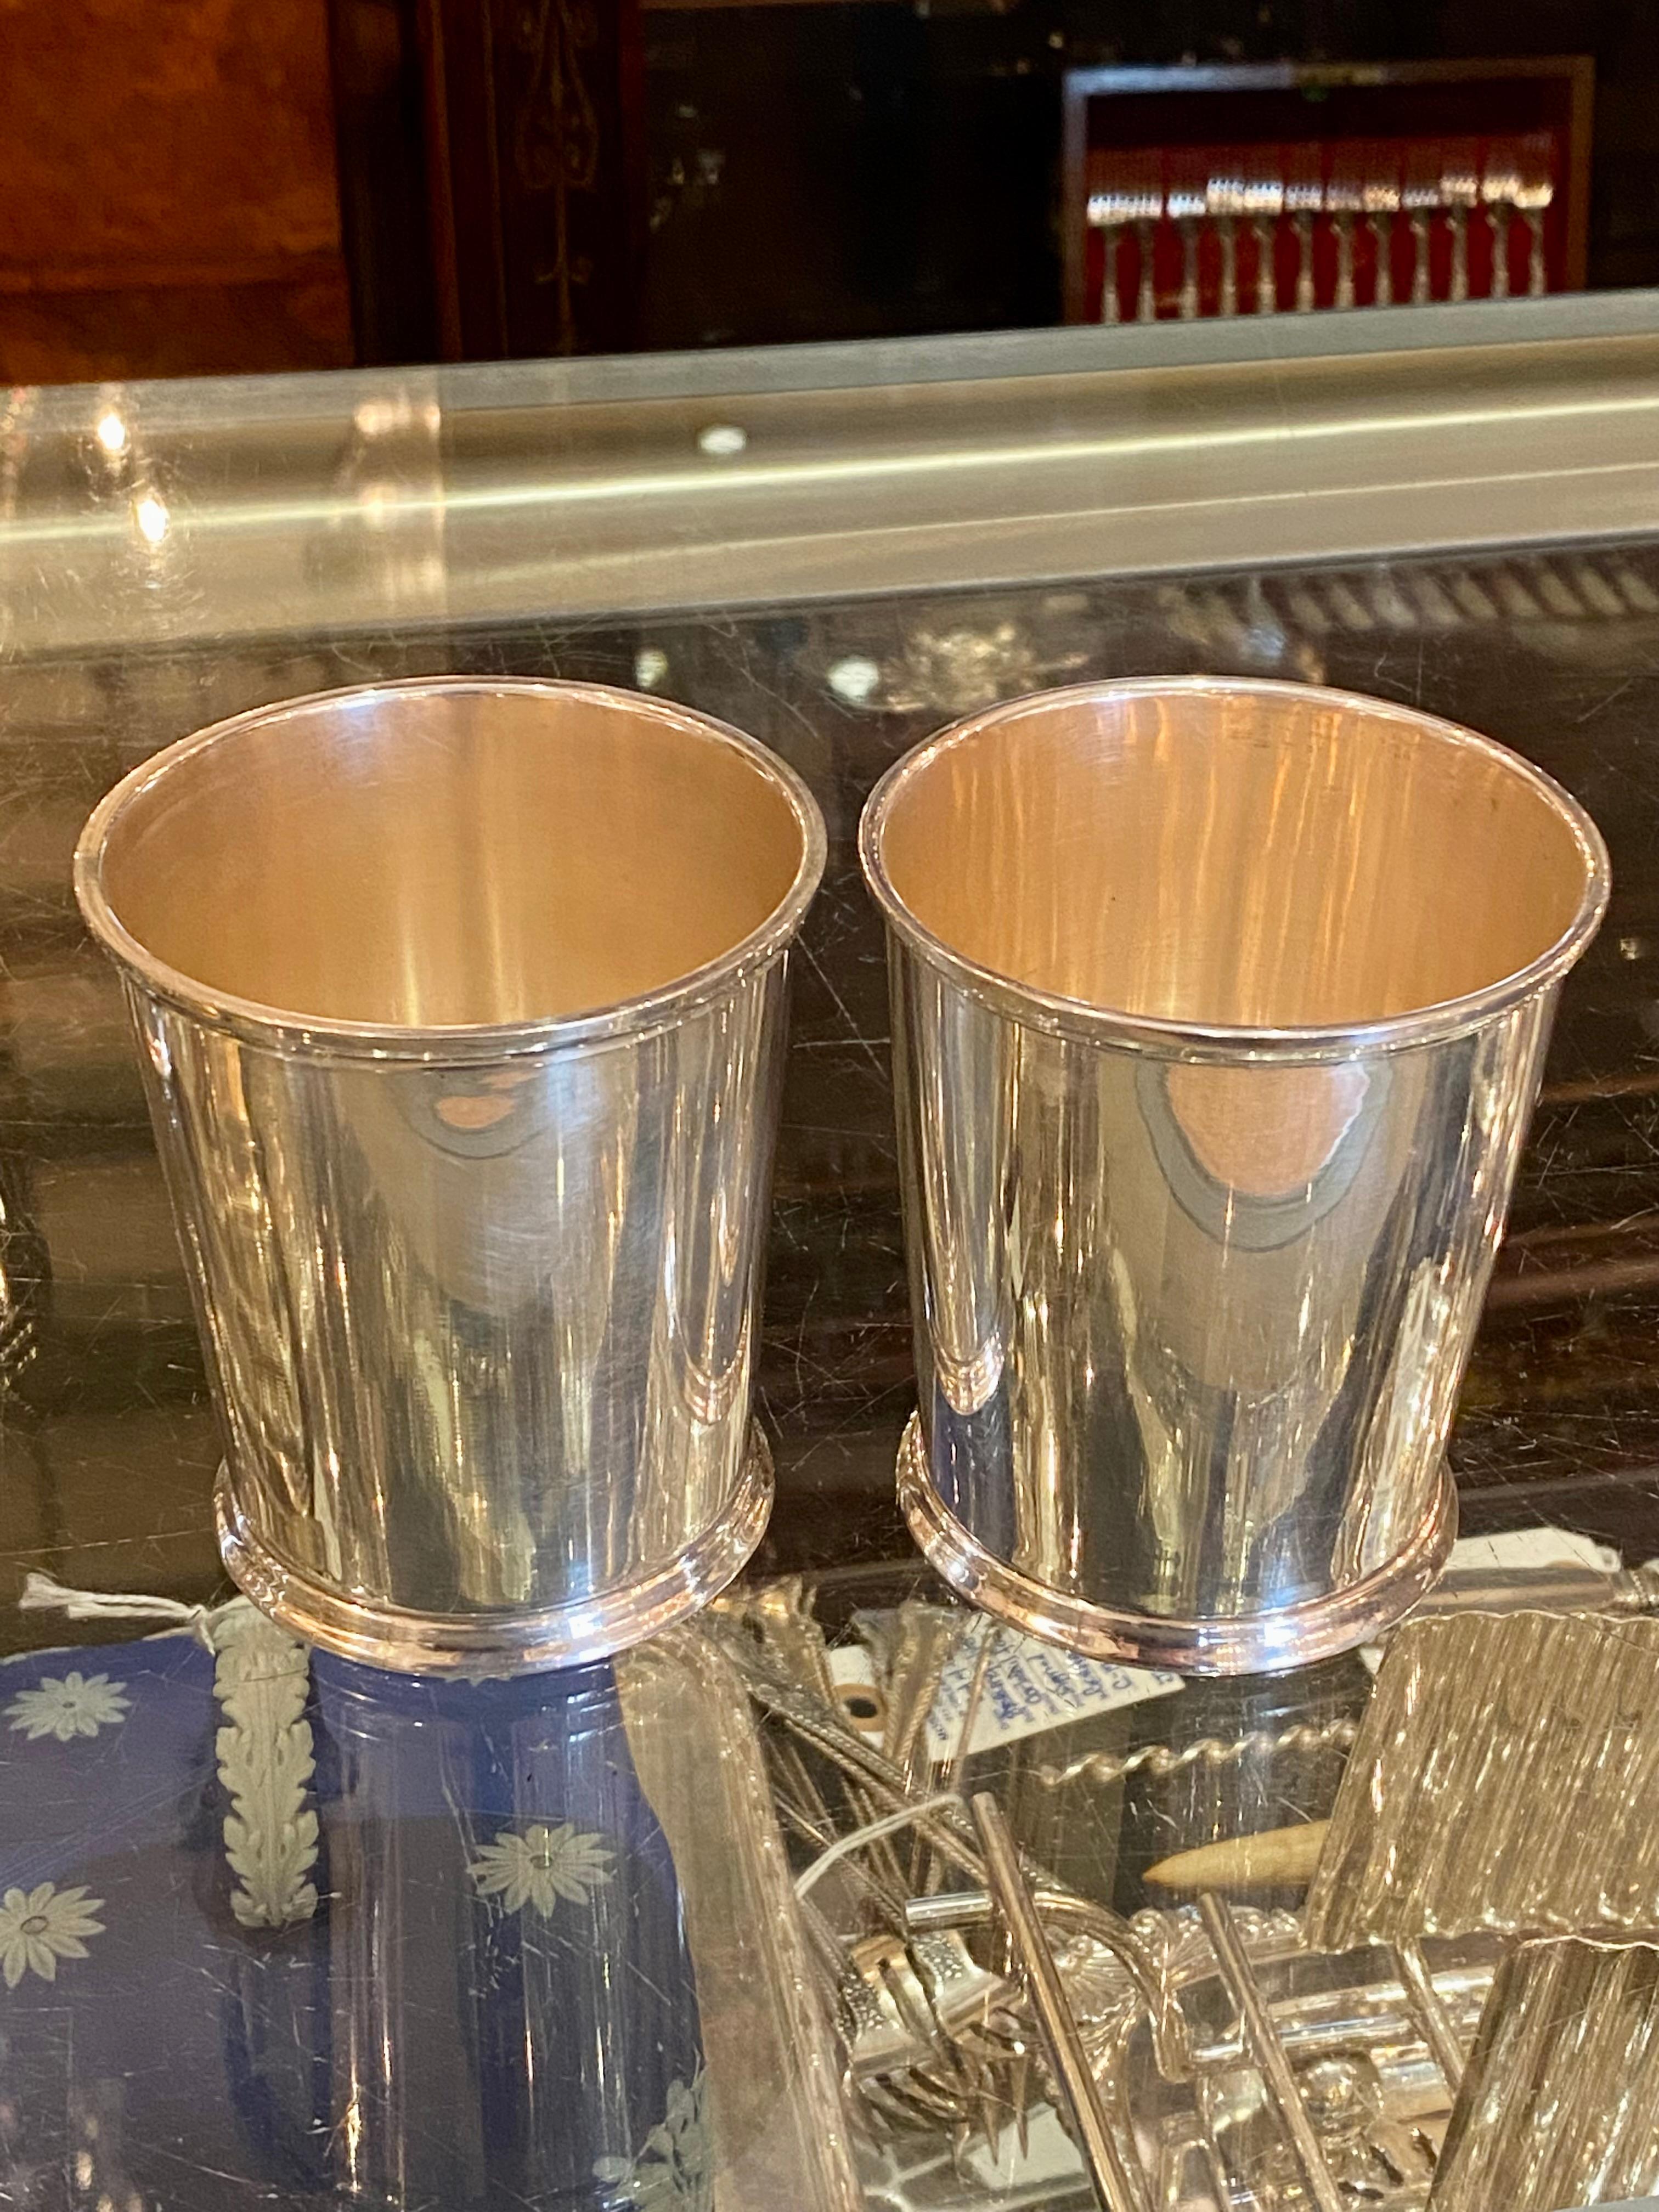 Set of 10 Antique American Sterling Silver Mint Julep Cups, Circa 1930's-1940's. 4